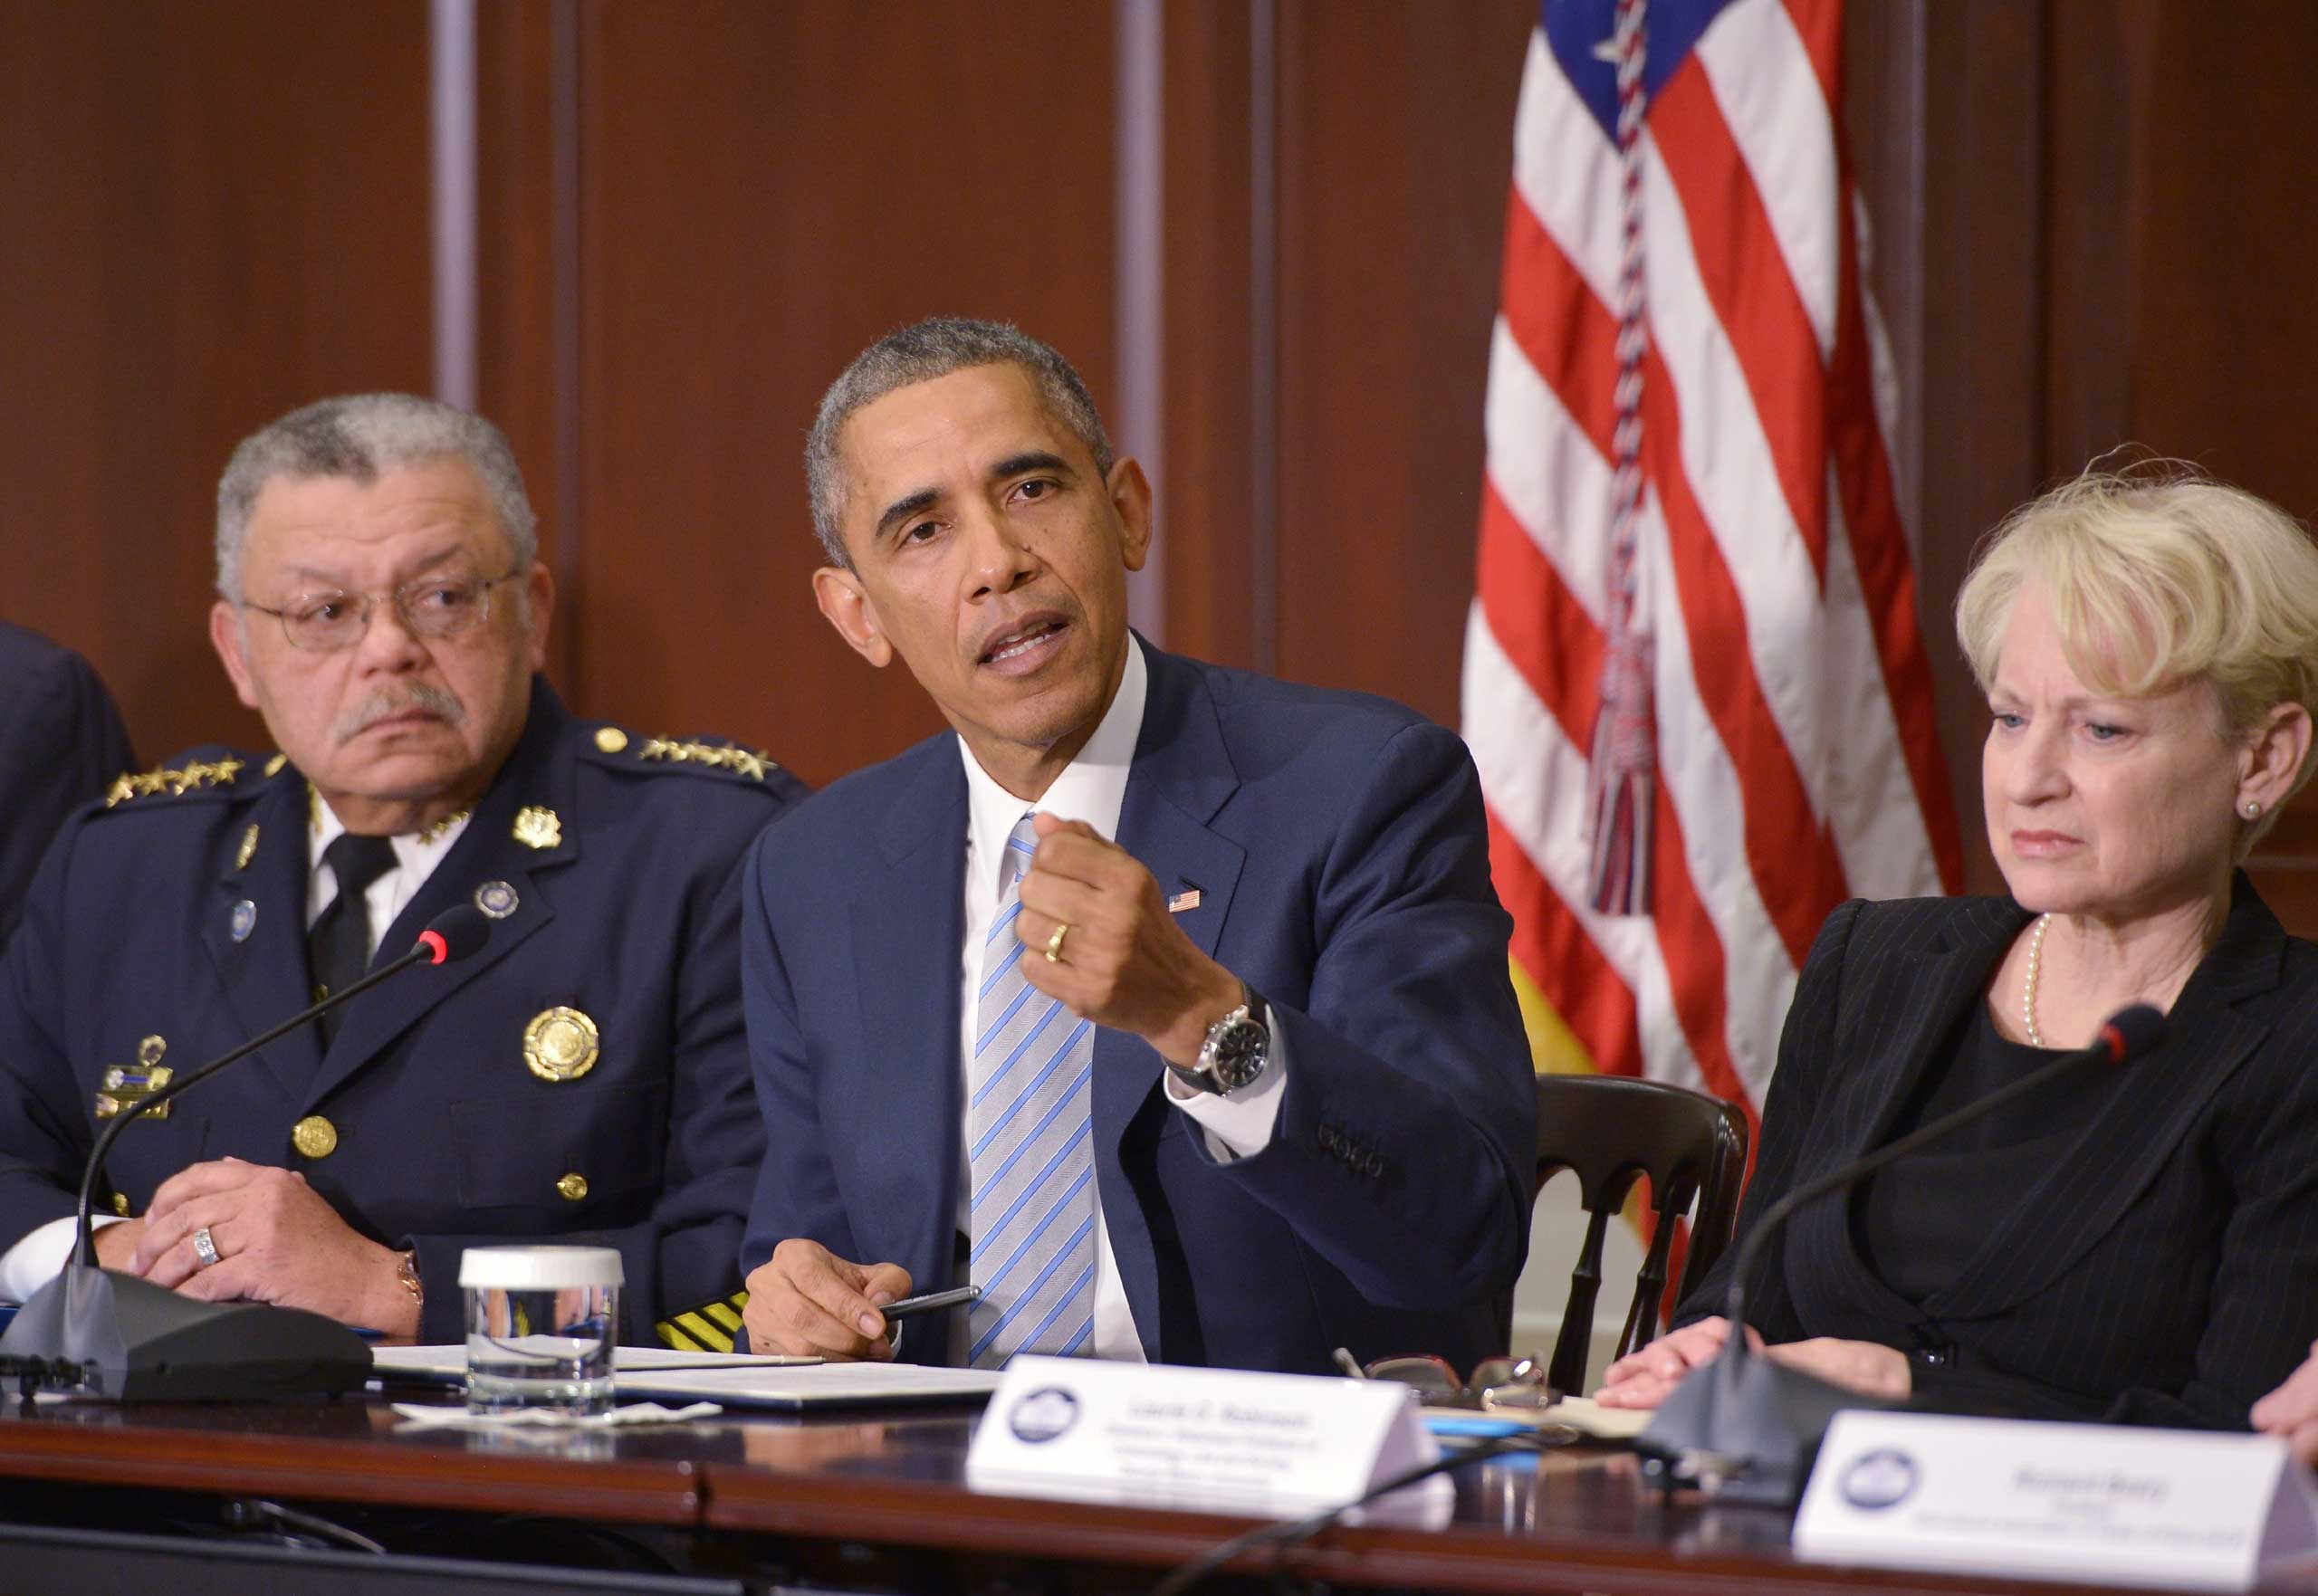 US President Barack Obama speaks after a meeting on building trust in communities following Ferguson unrest, with Philadelphia Police Commissioner Charles Ramsey (L) and George Mason University professor of Criminology, Law and Society Laurie Robinson, who were appointed by Obama to chair a task force on policing, at the Eisenhower Executive Office Building in Washington on Dec. 1, 2014. (Mandel Ngan—AFP/Getty Images)